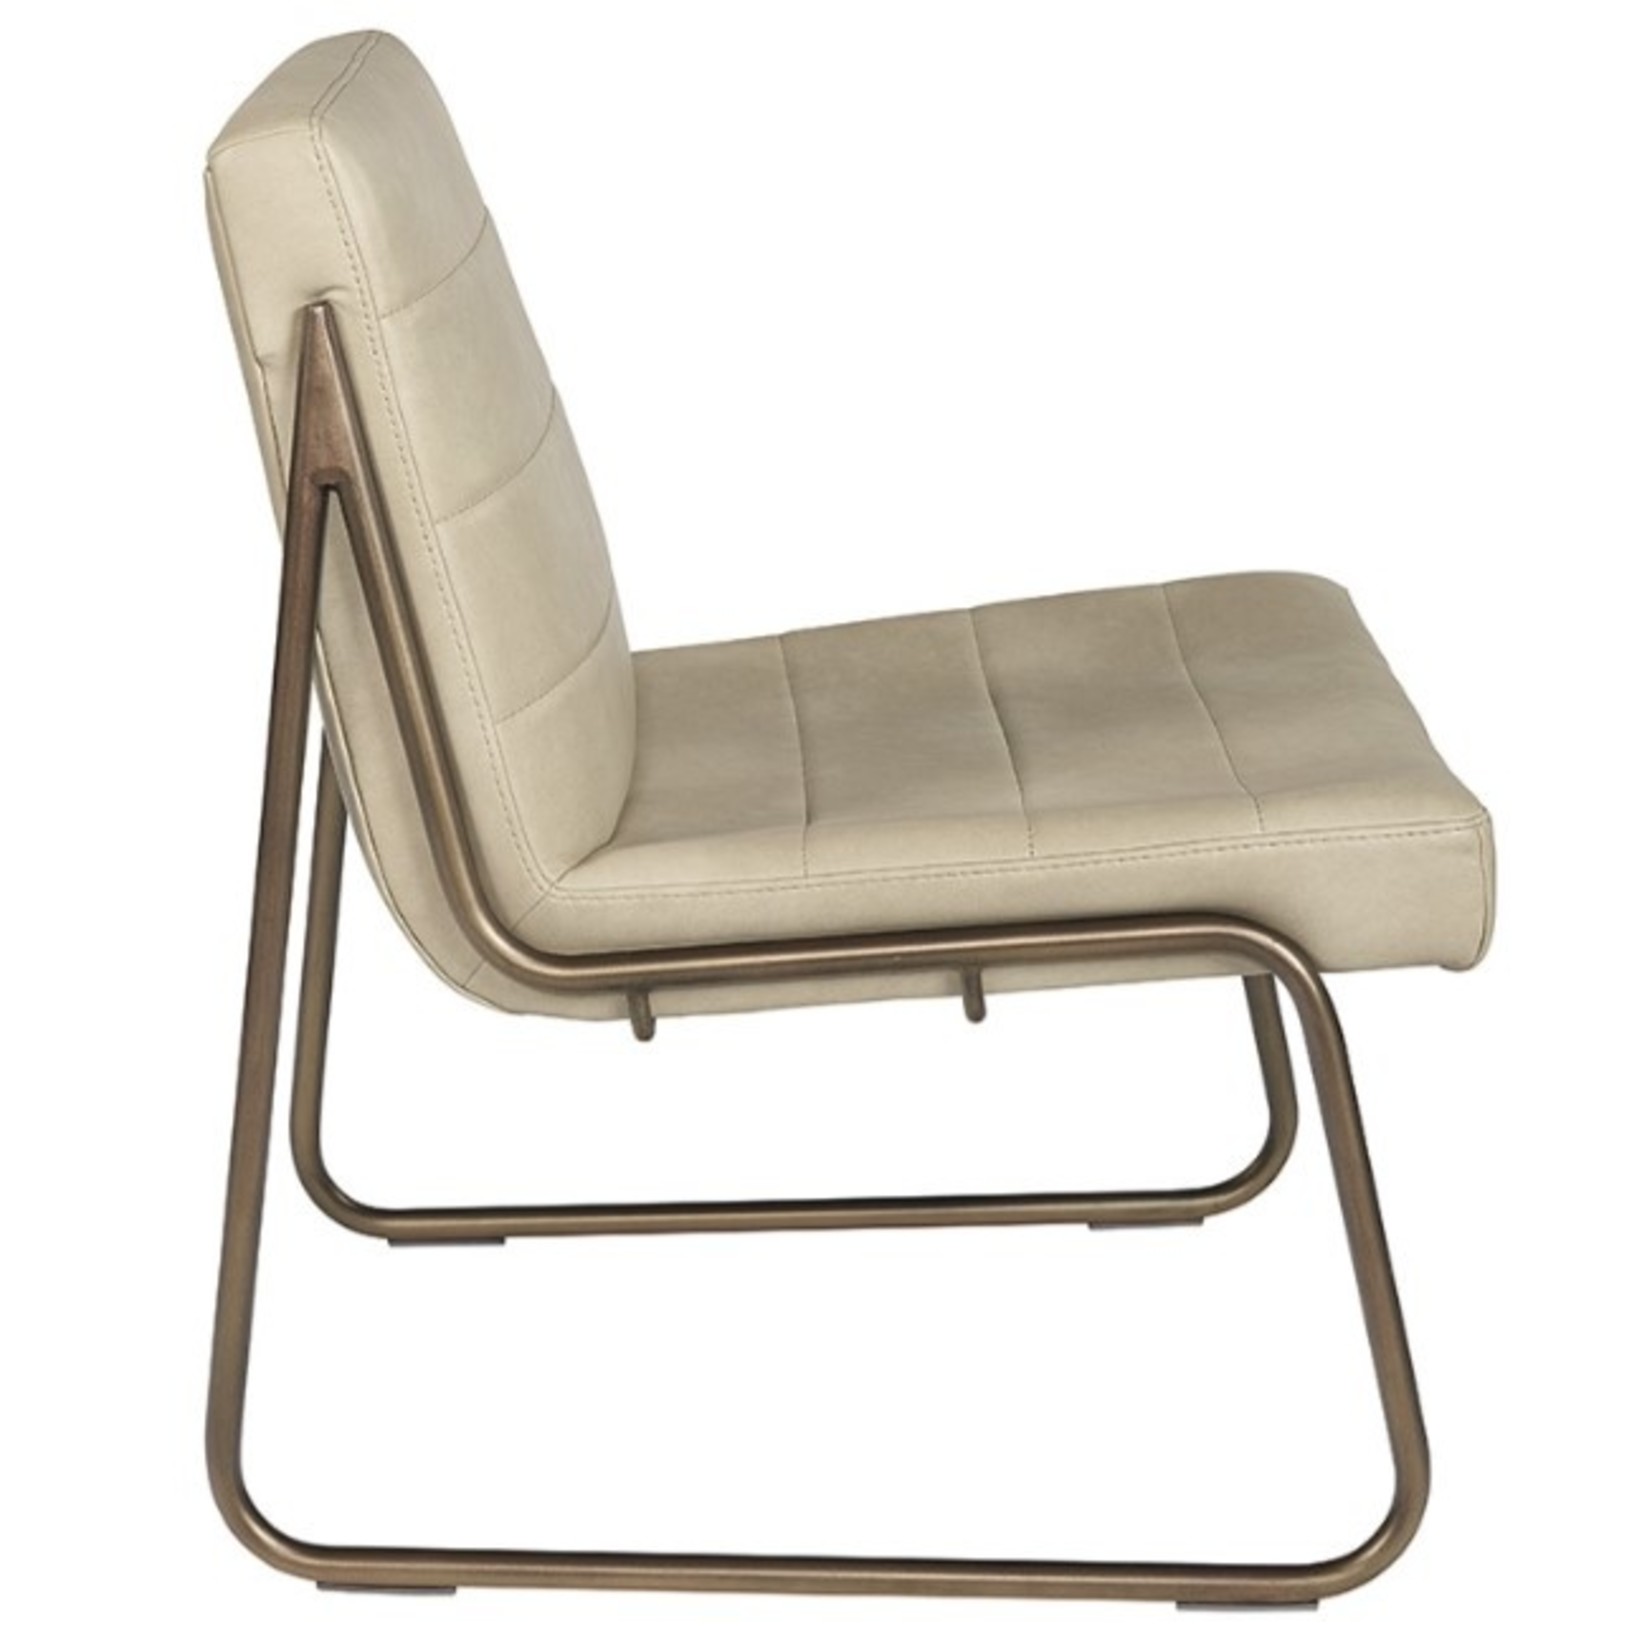 Mickler & Co. Anthony Lounge Chair